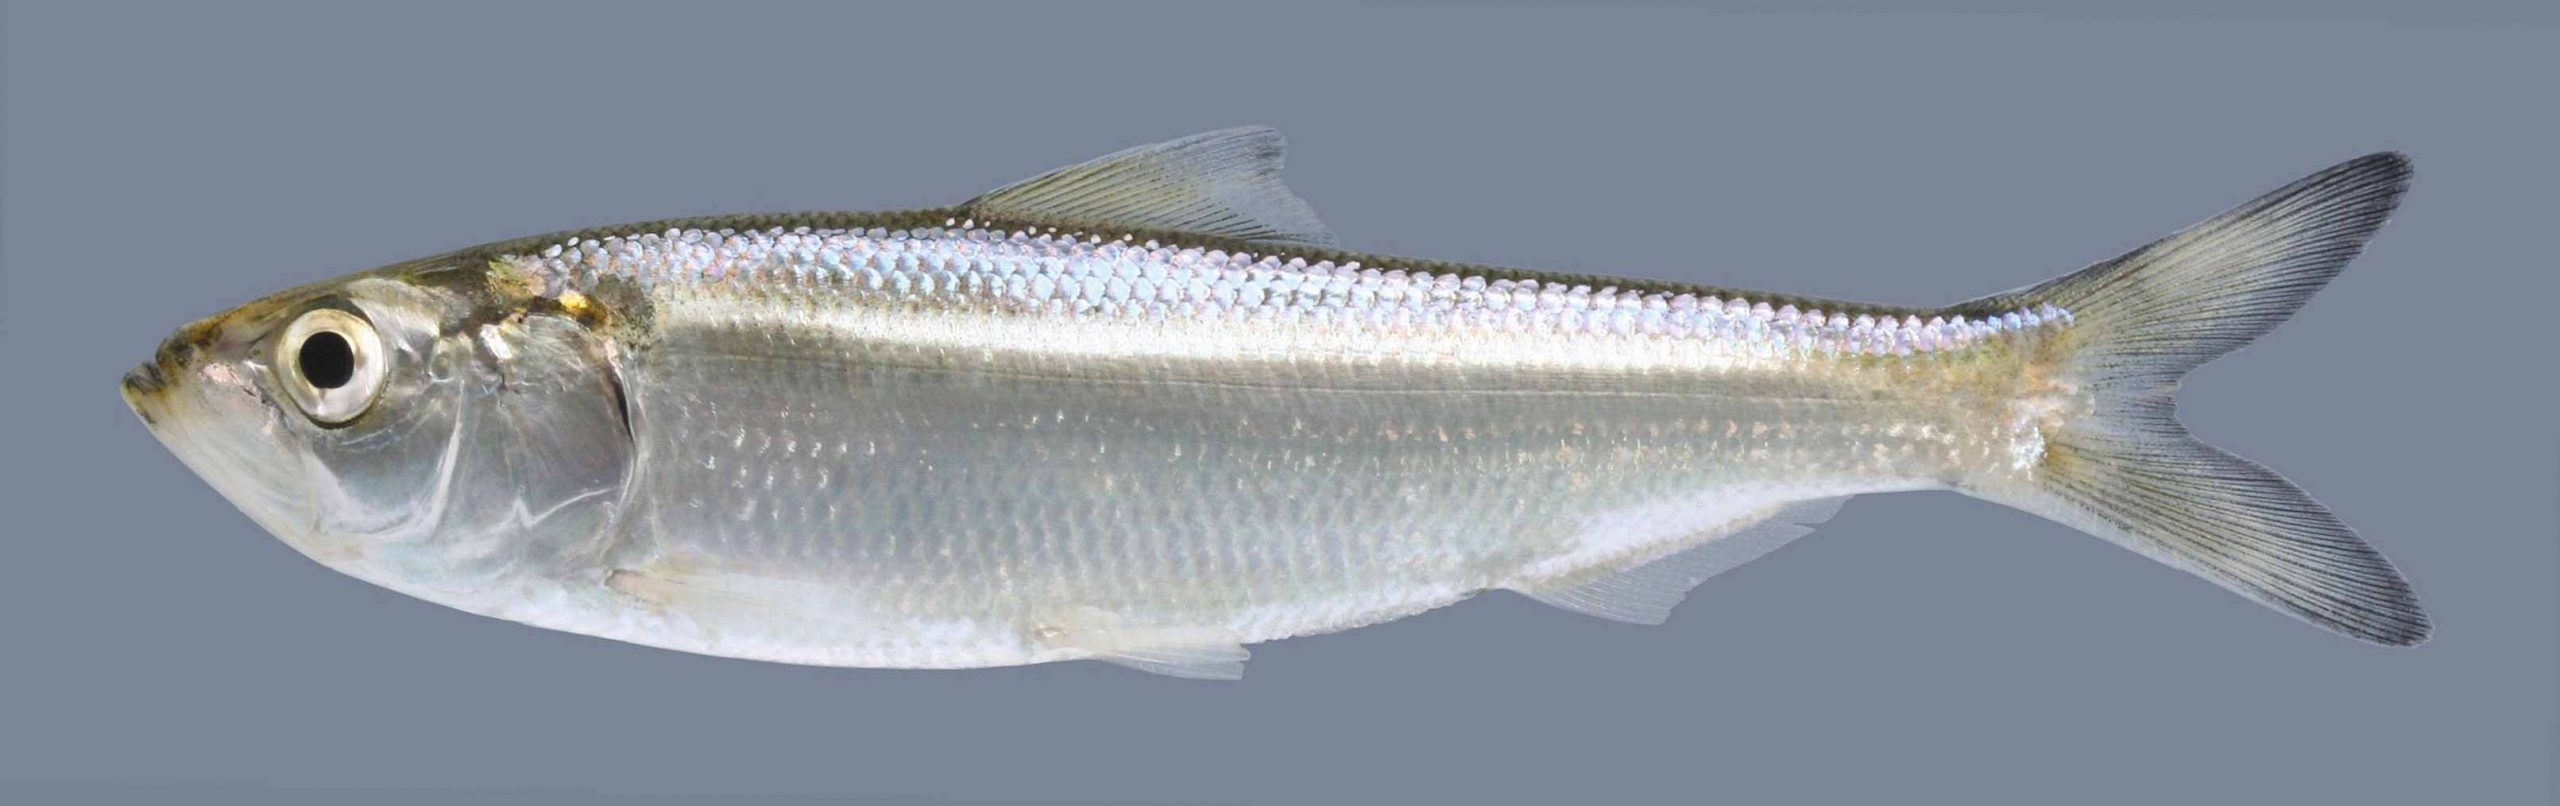 Lateral view of a skipjack herring